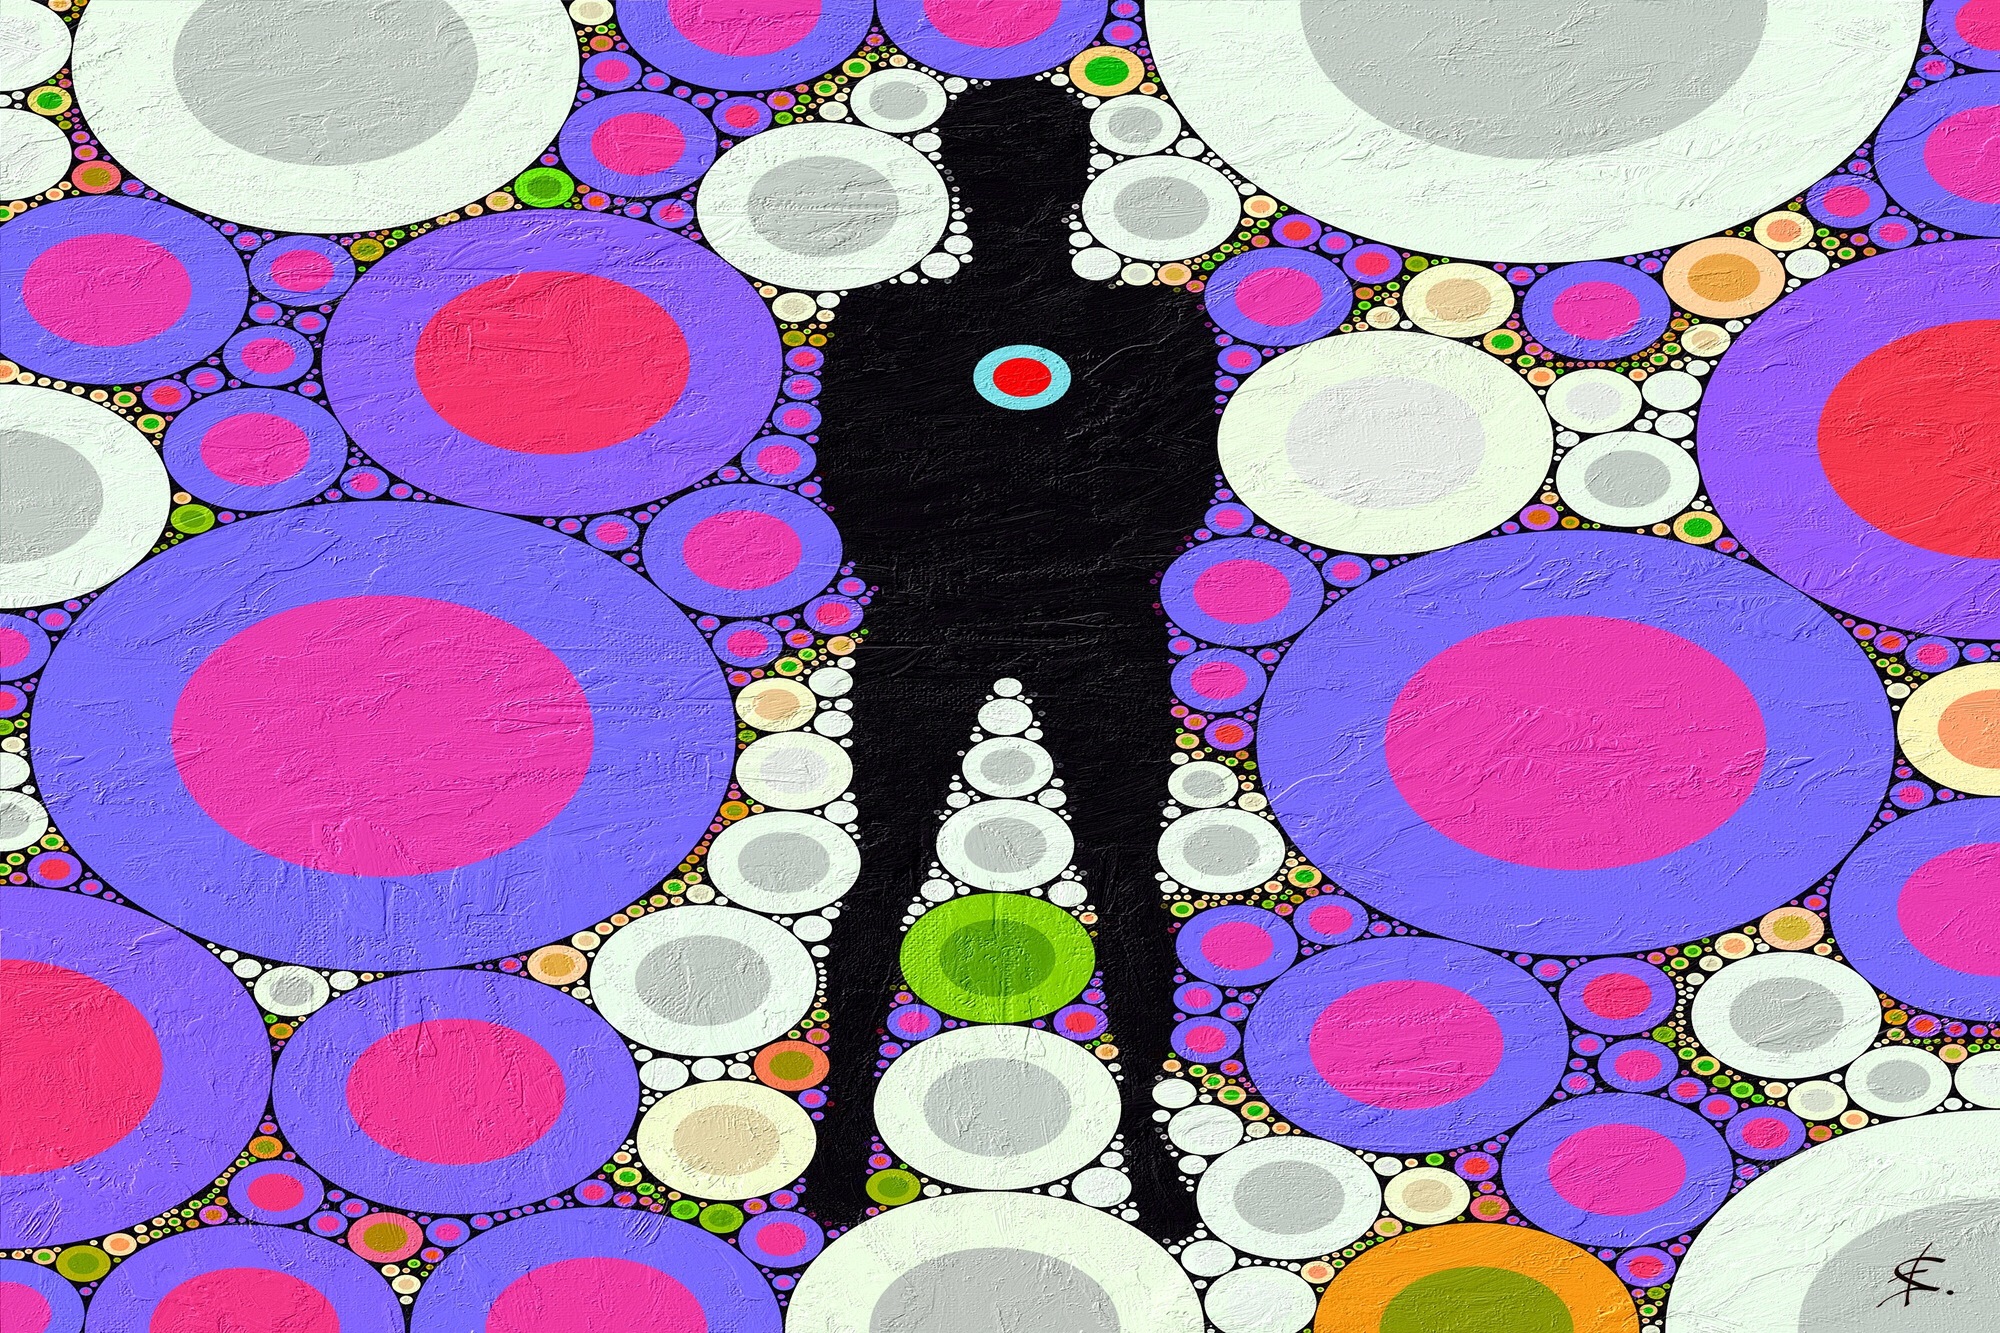 Shadow of man standing in the middle of photo with psychedelic colorful pattern in the background